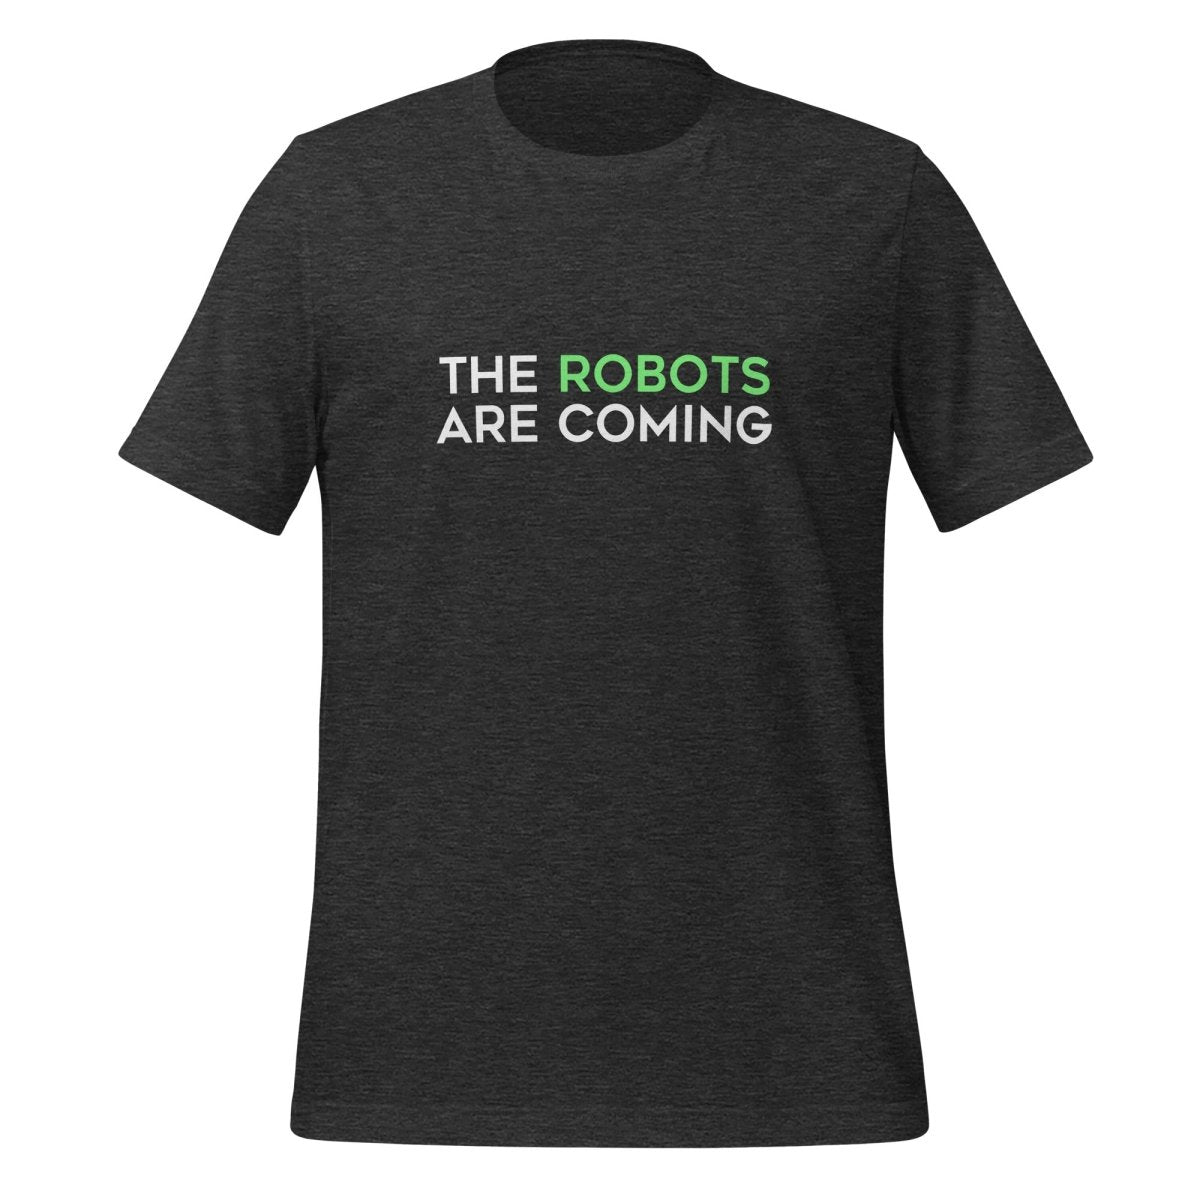 The Robots Are Coming (Green) T - Shirt 1 (unisex) - Dark Grey Heather - AI Store